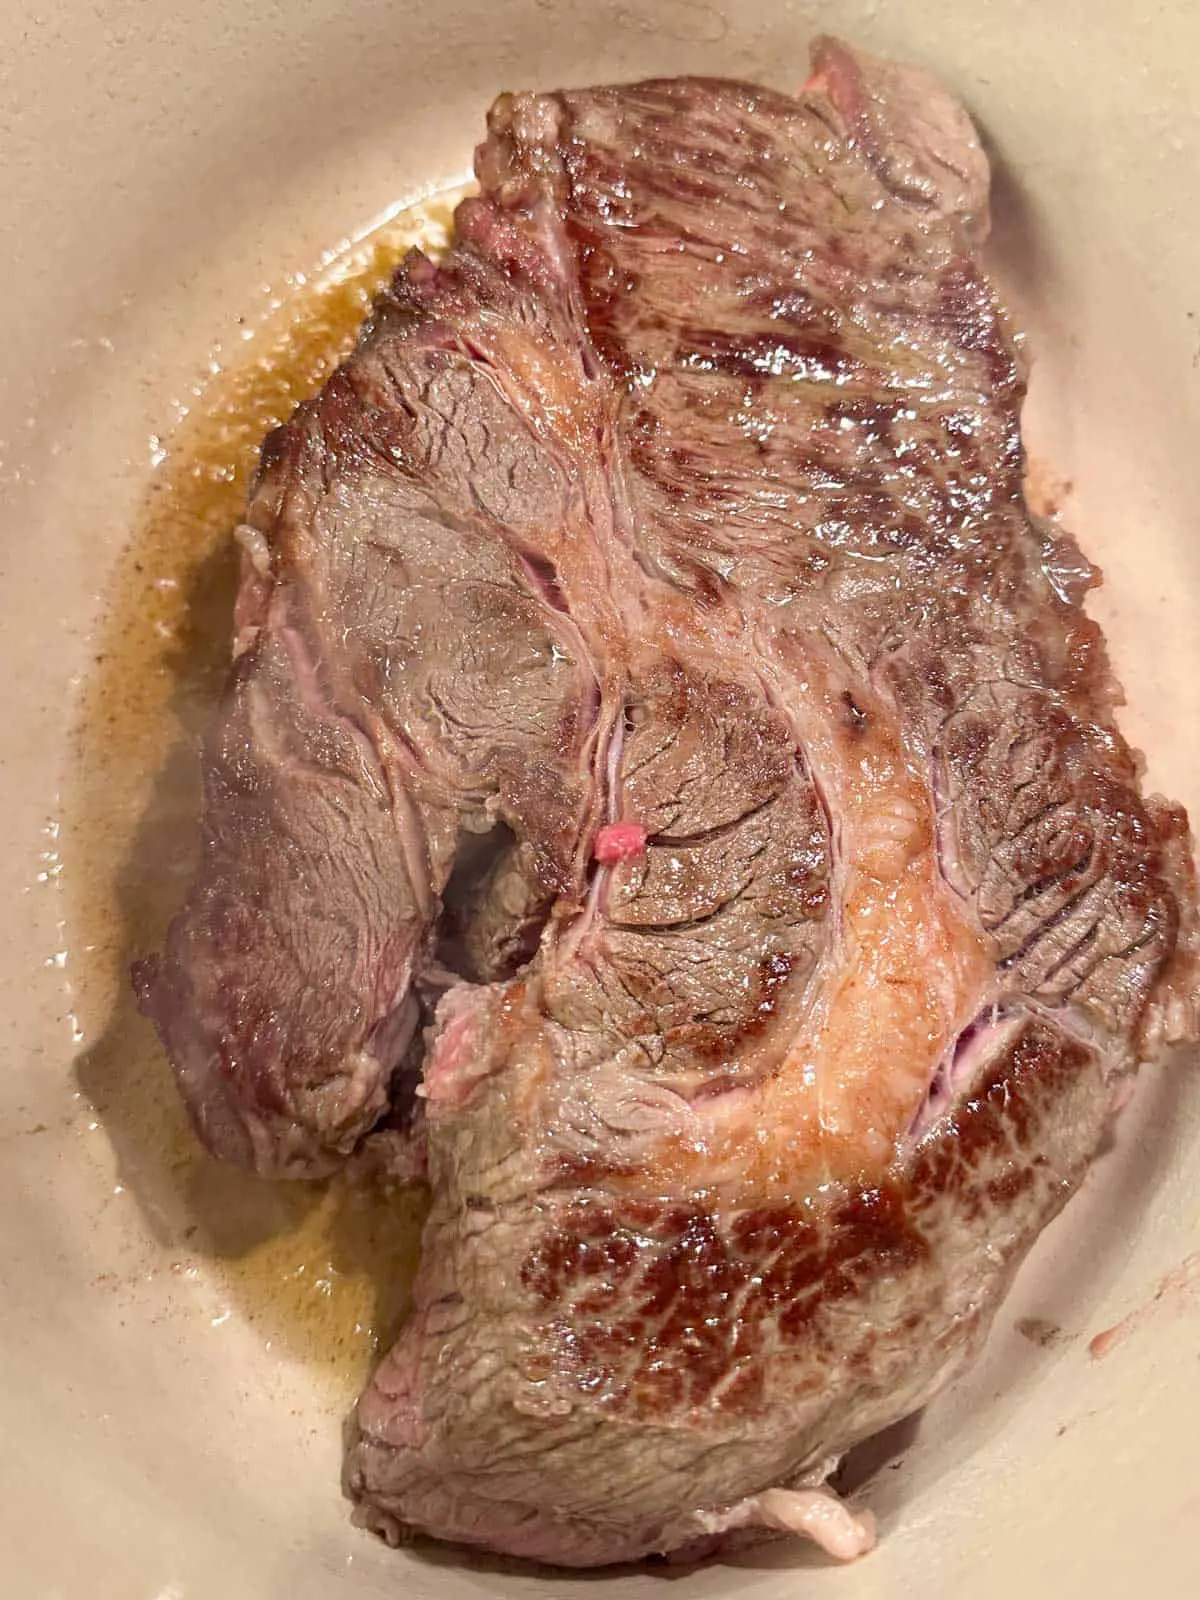 Beef chuck roast which has been browned in a Dutch oven.